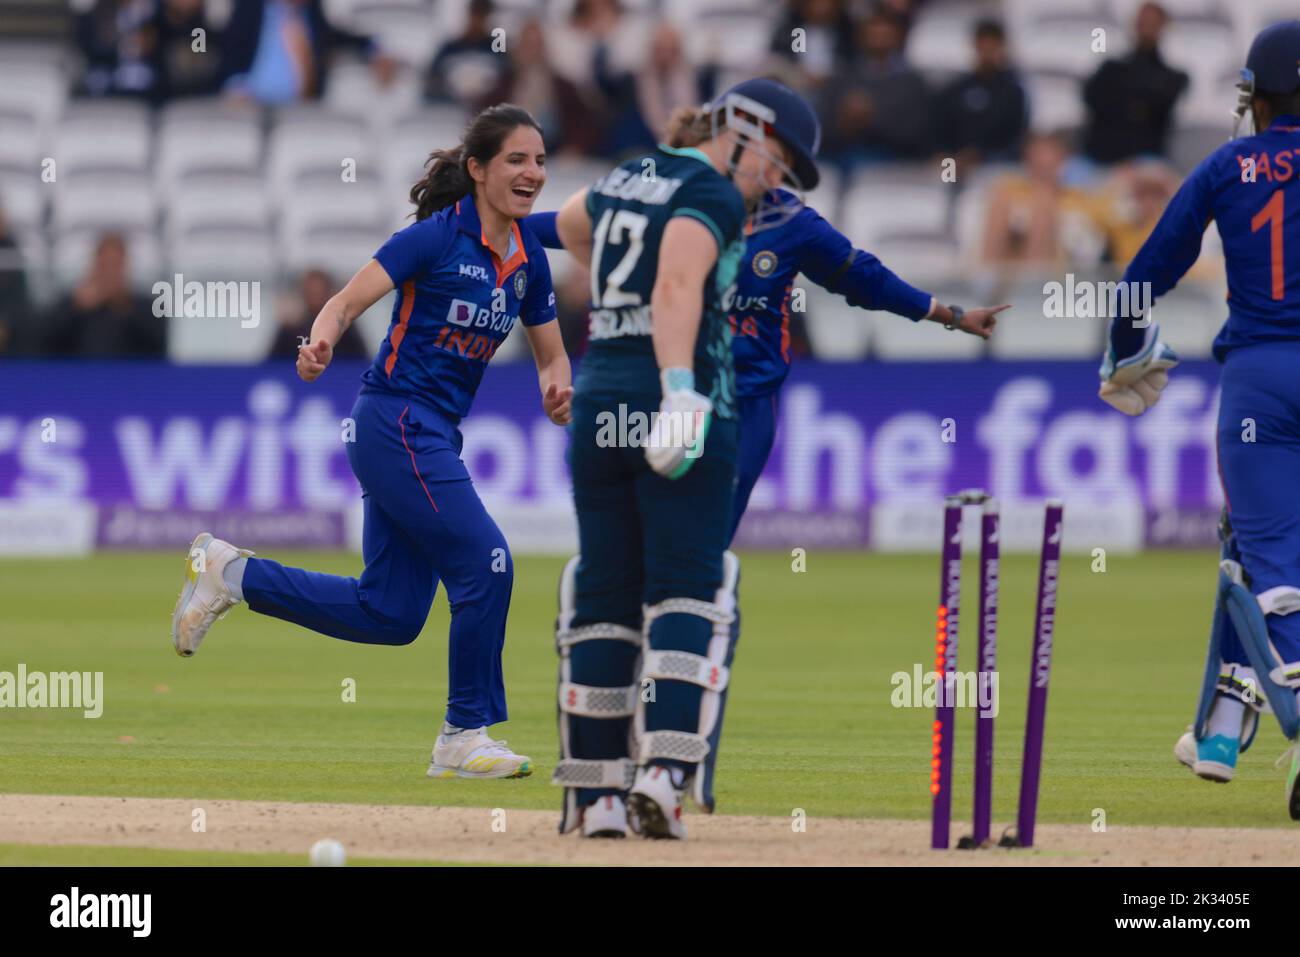 24 September , 2022, London, UK. England’s Tammy Beaumont bowled by Renuka Singh Thakur as England women take on India in the 3rd Royal London One Day International at Lords. David Rowe/Alamy Live News. Stock Photo